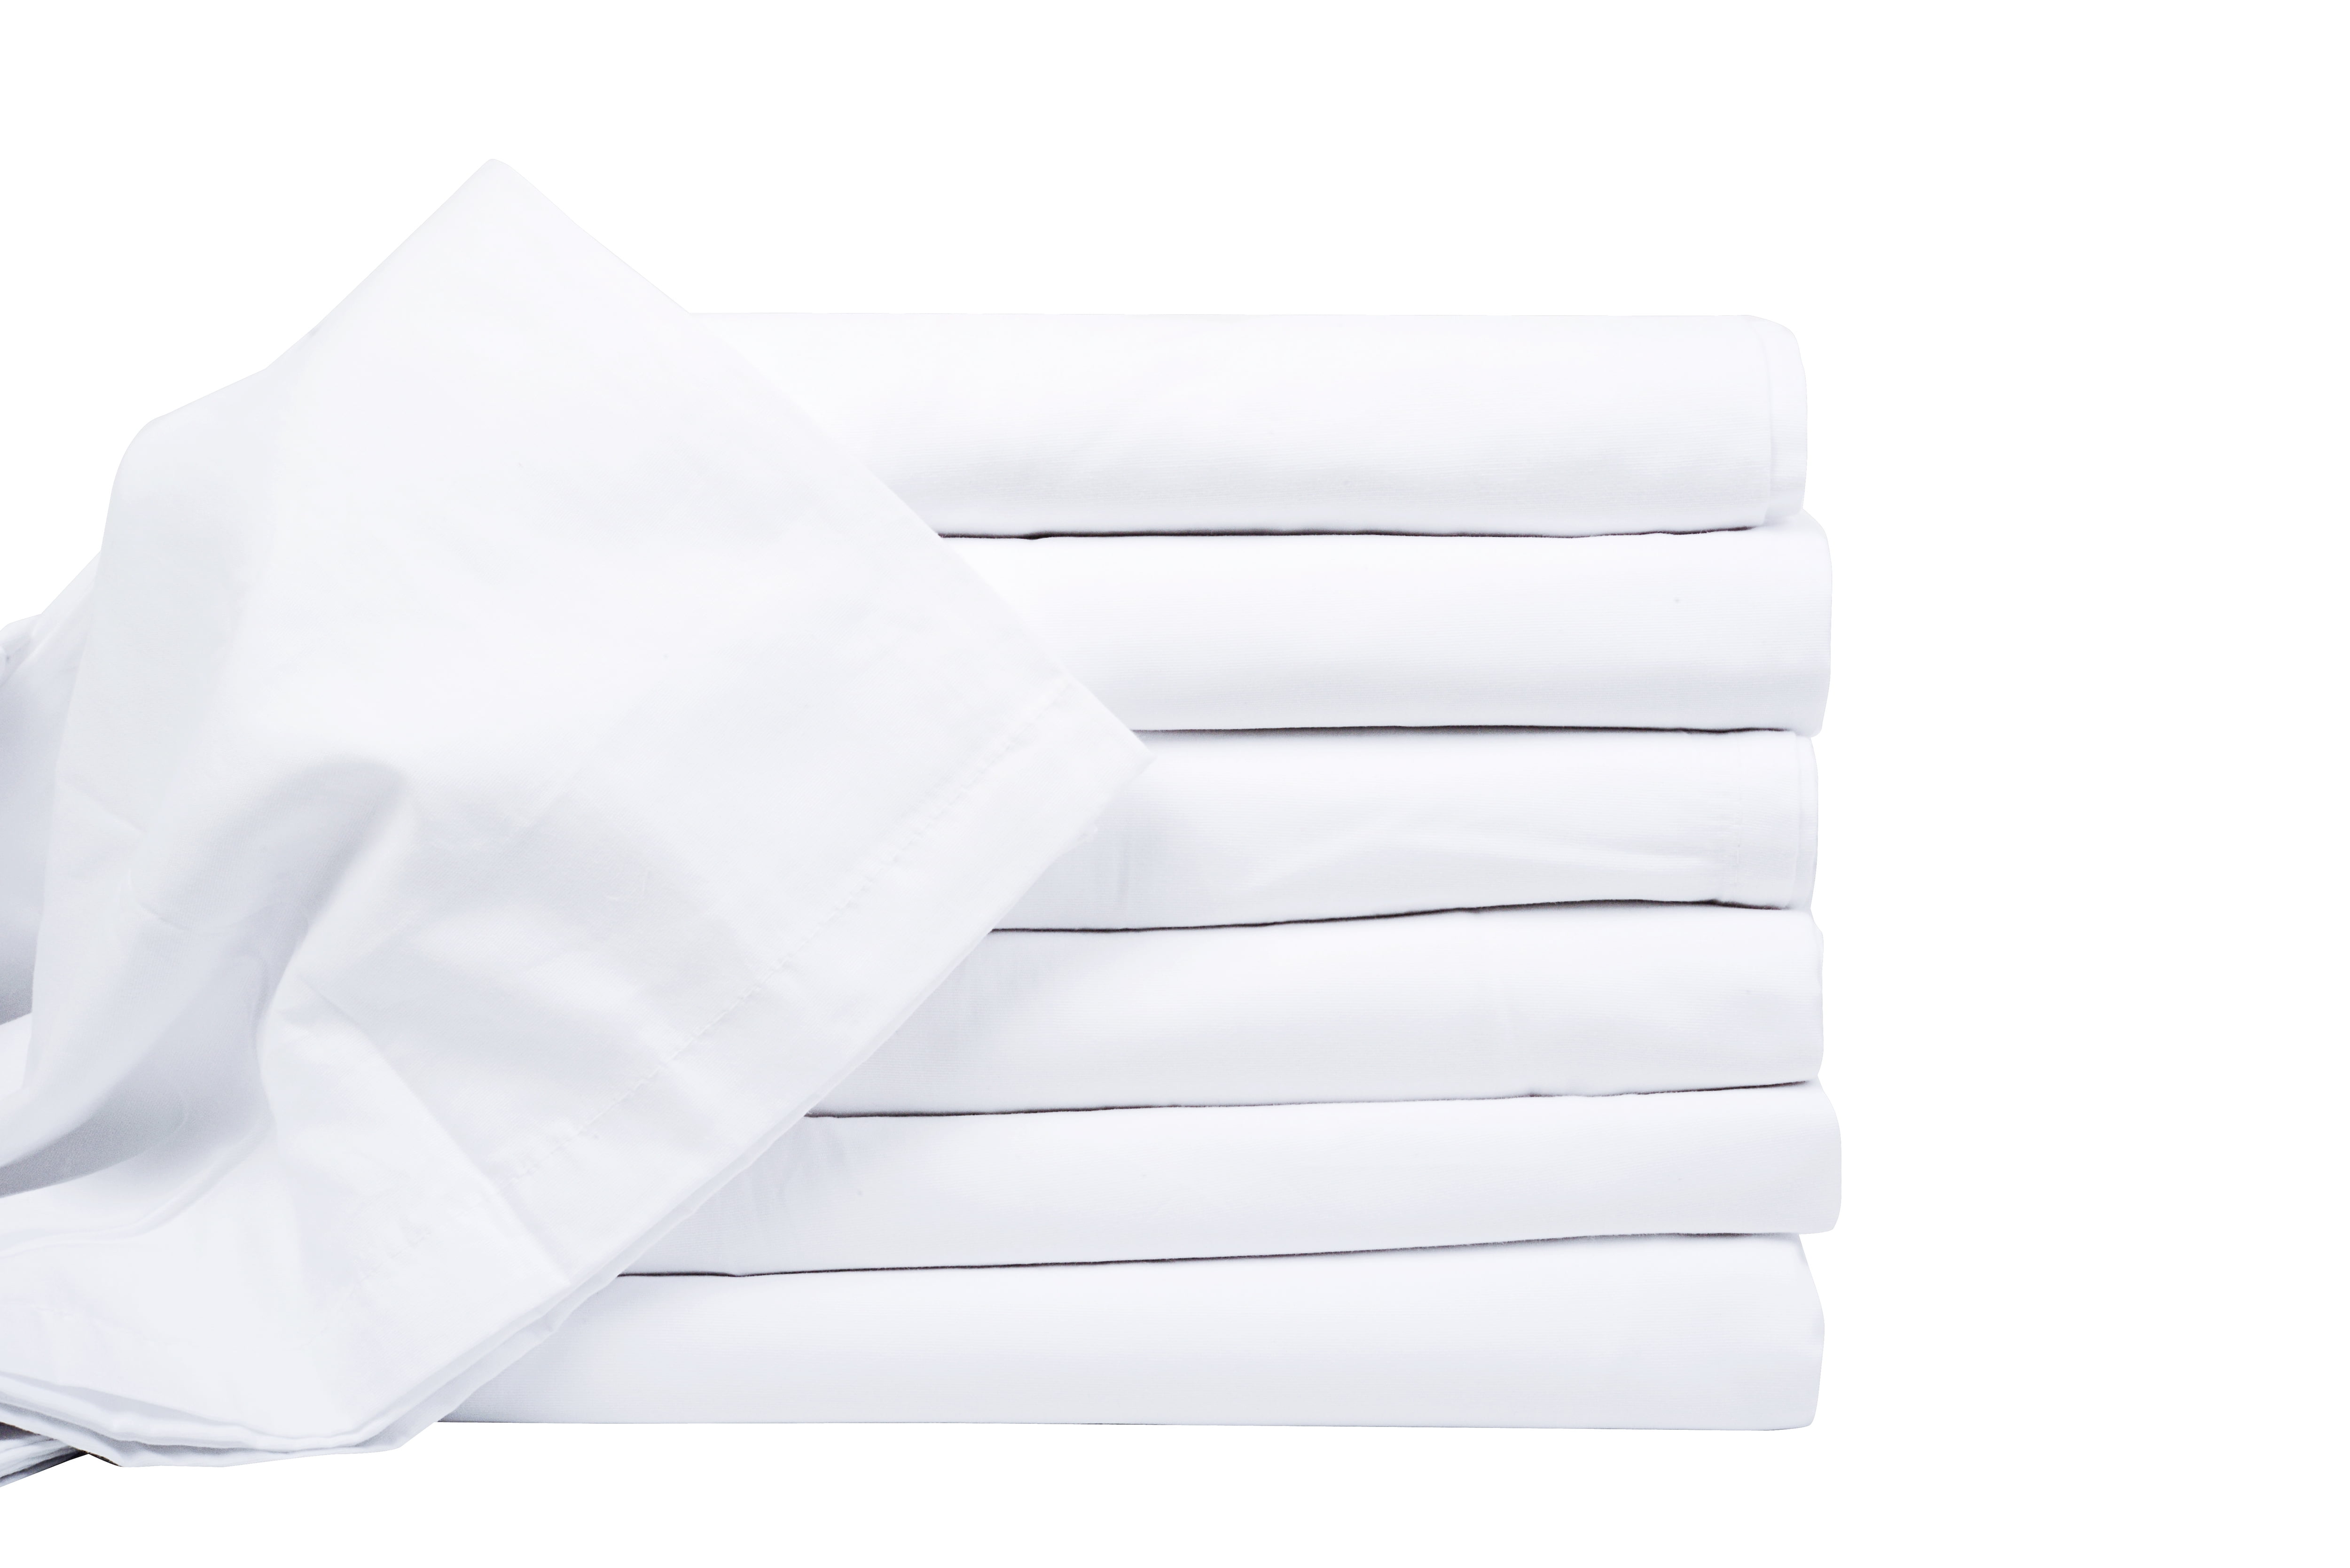 1 king size white hotel flat sheet series T180 percale hotel 108x110 cotton rich 